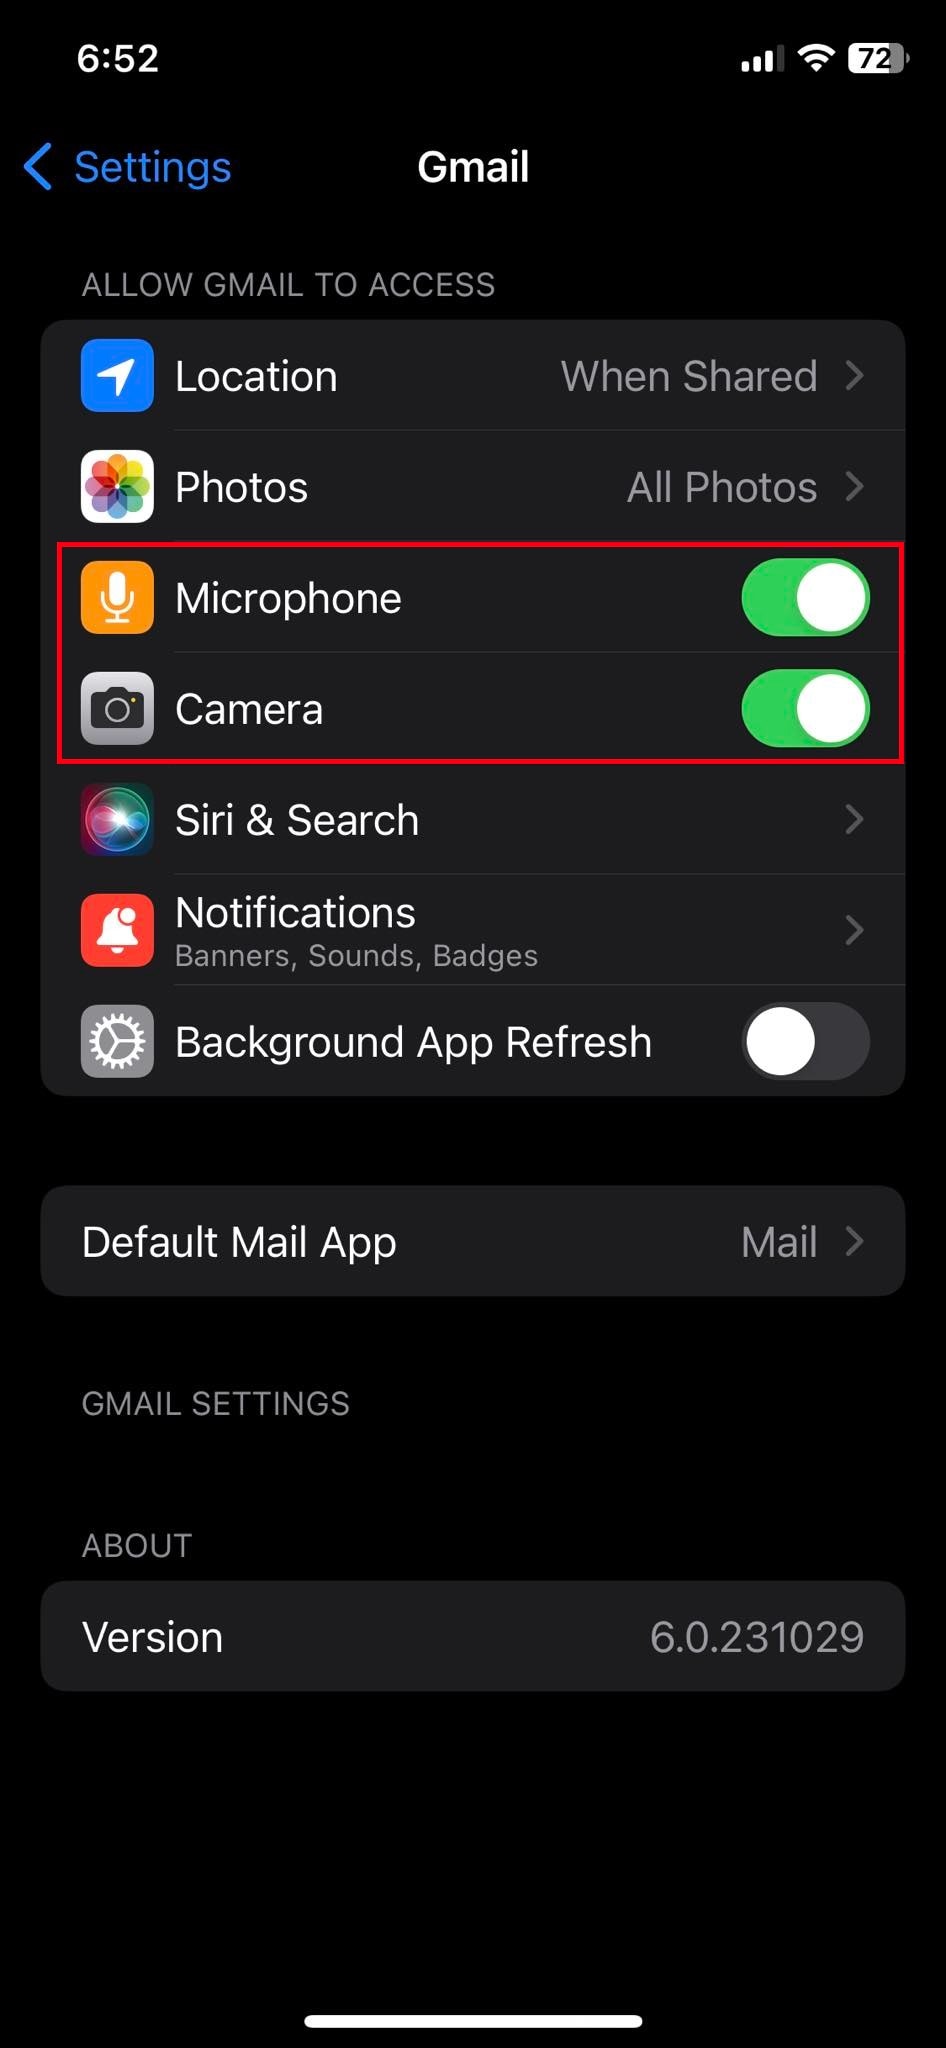 gmail app on iphone settings